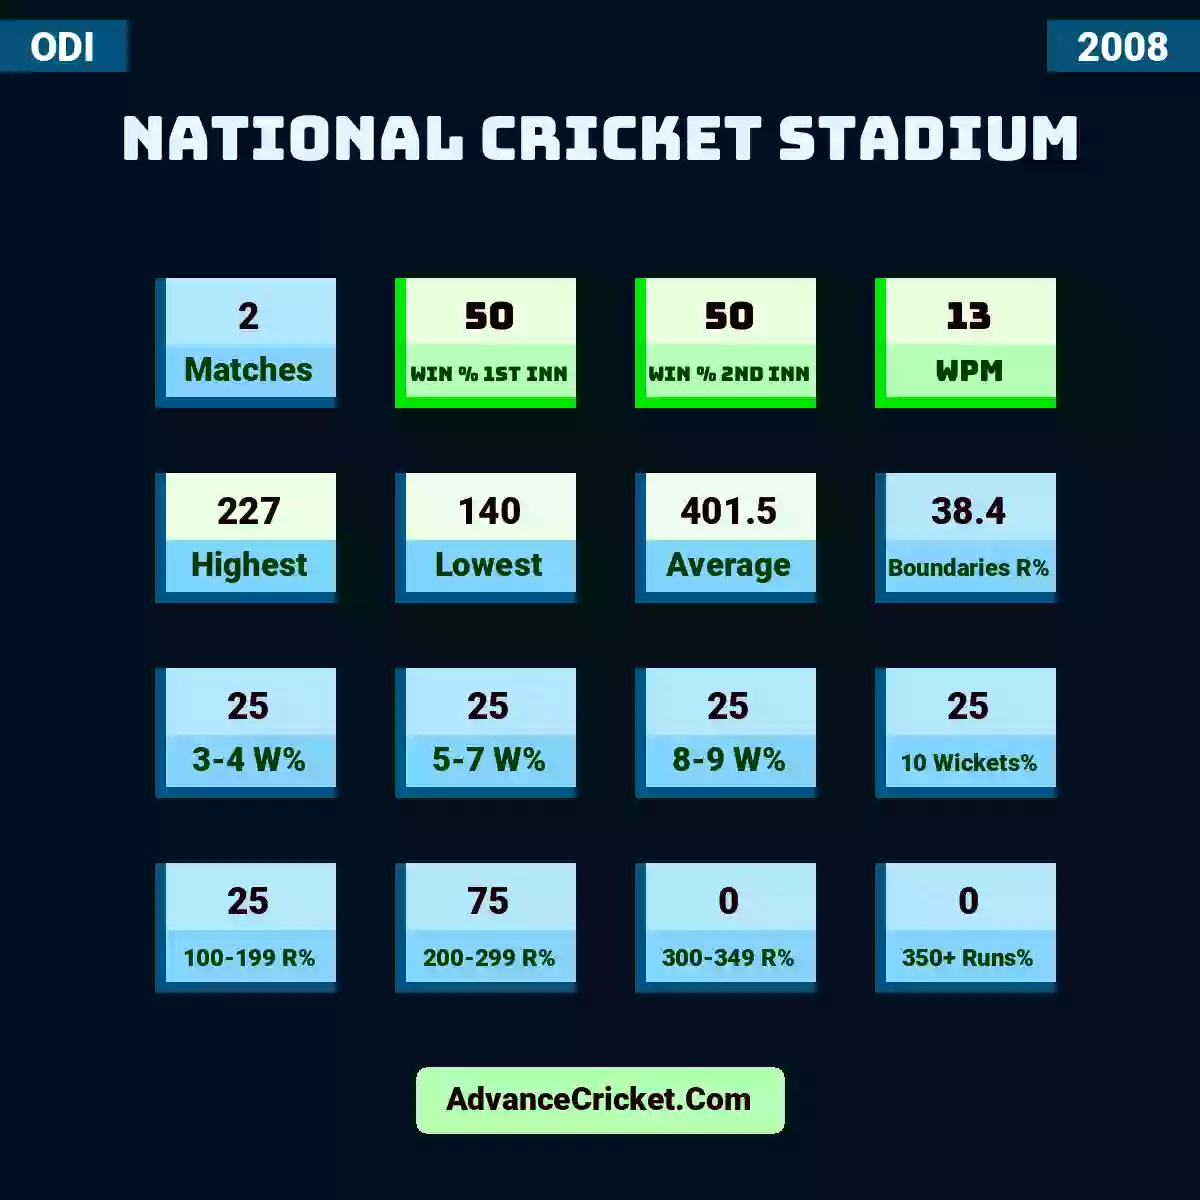 Image showing National Cricket Stadium with Matches: 2, Win % 1st Inn: 50, Win % 2nd Inn: 50, WPM: 13, Highest: 227, Lowest: 140, Average: 401.5, Boundaries R%: 38.4, 3-4 W%: 25, 5-7 W%: 25, 8-9 W%: 25, 10 Wickets%: 25, 100-199 R%: 25, 200-299 R%: 75, 300-349 R%: 0, 350+ Runs%: 0.